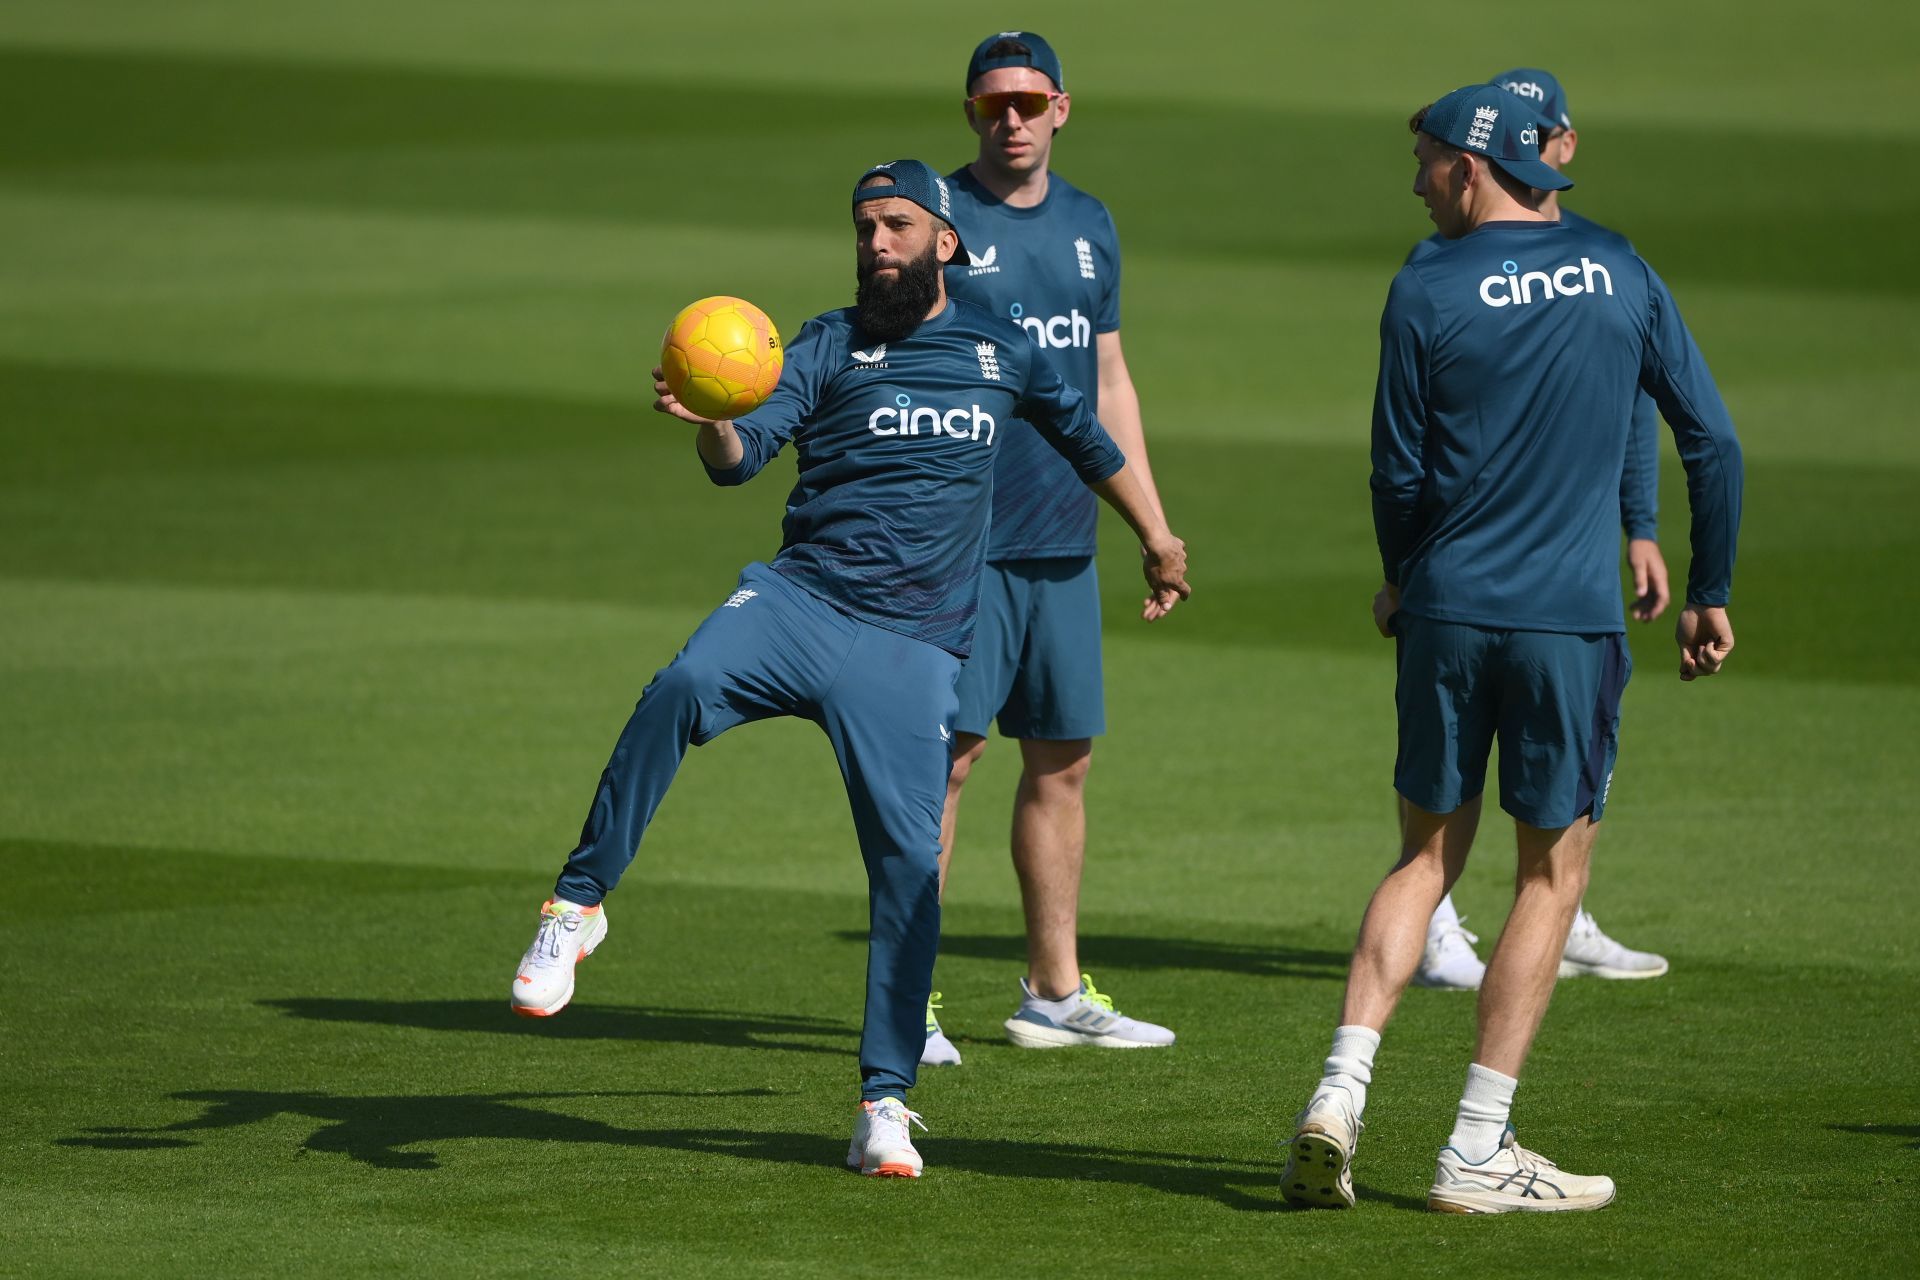 England player Moeen Ali in football action during nets session ahead of the Ashes Test